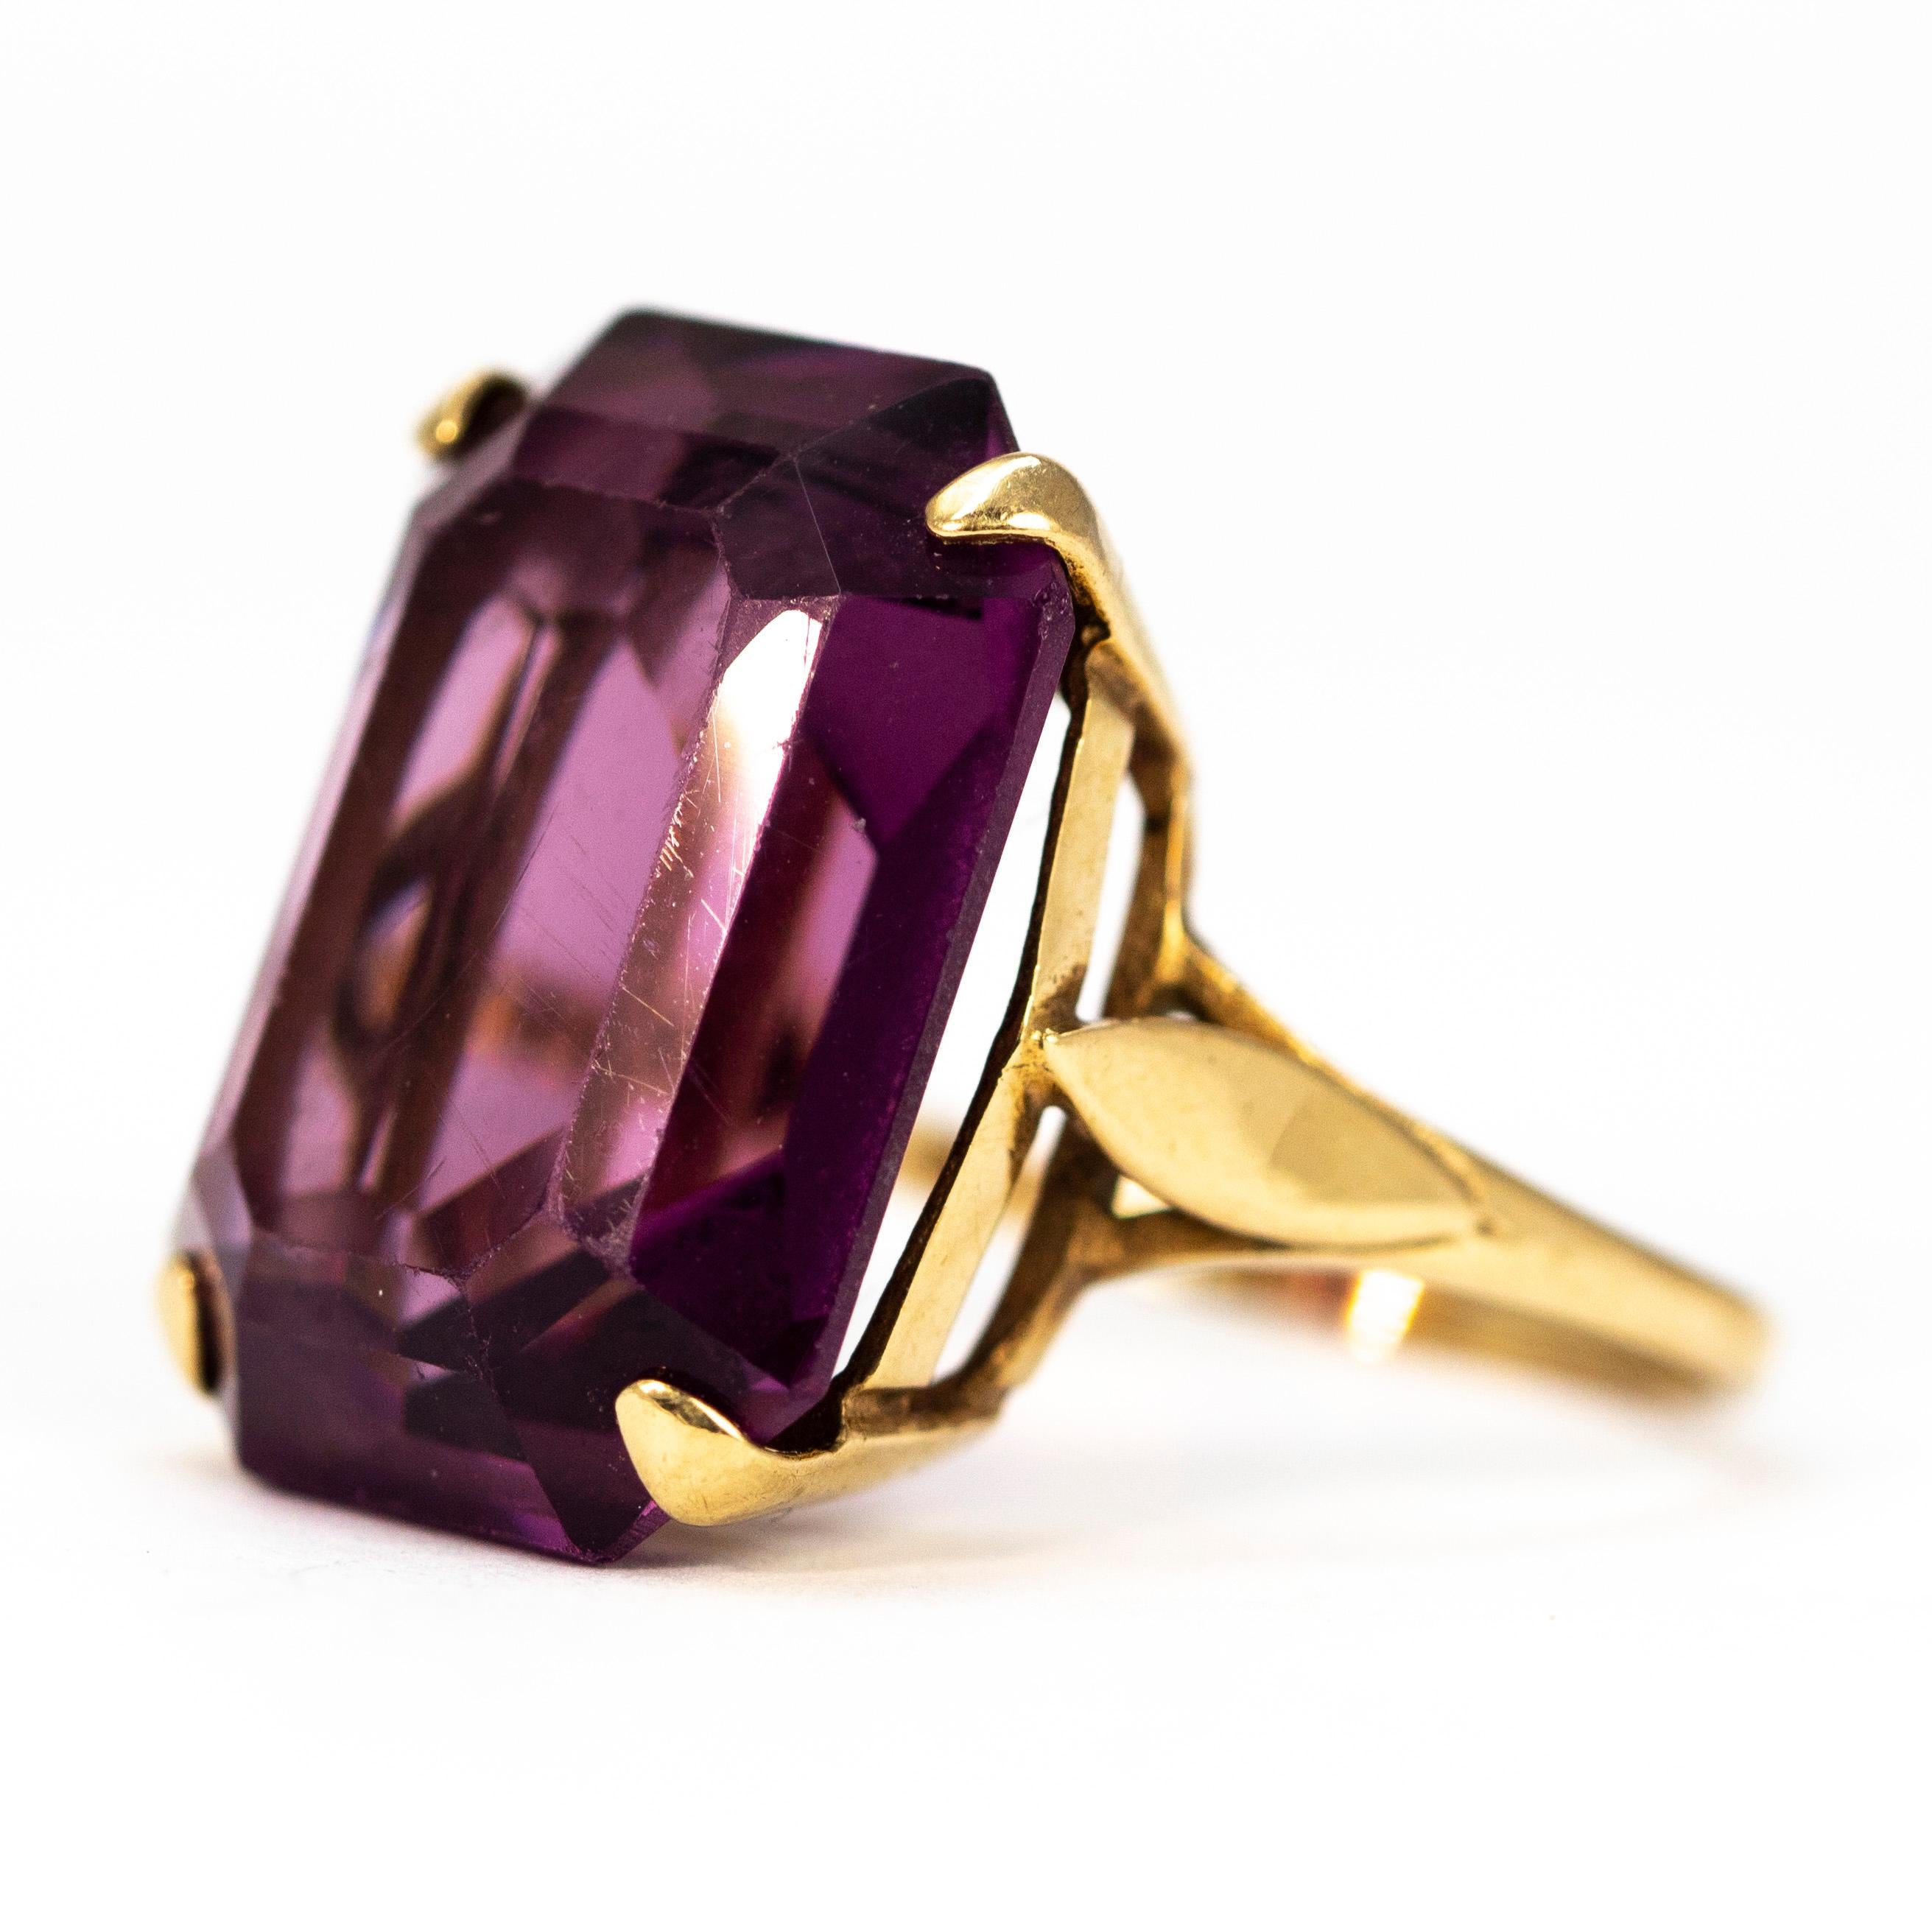 The beautiful amethyst stone is a gorgeous pinky purple colour and is held by a simple claw setting. The galley is simply decorative and the shoulders have a leaf shaped panel attached. 

Ring Size: O or 7 1/4
Stone Dimensions: 20 x 15mm 

Weight: